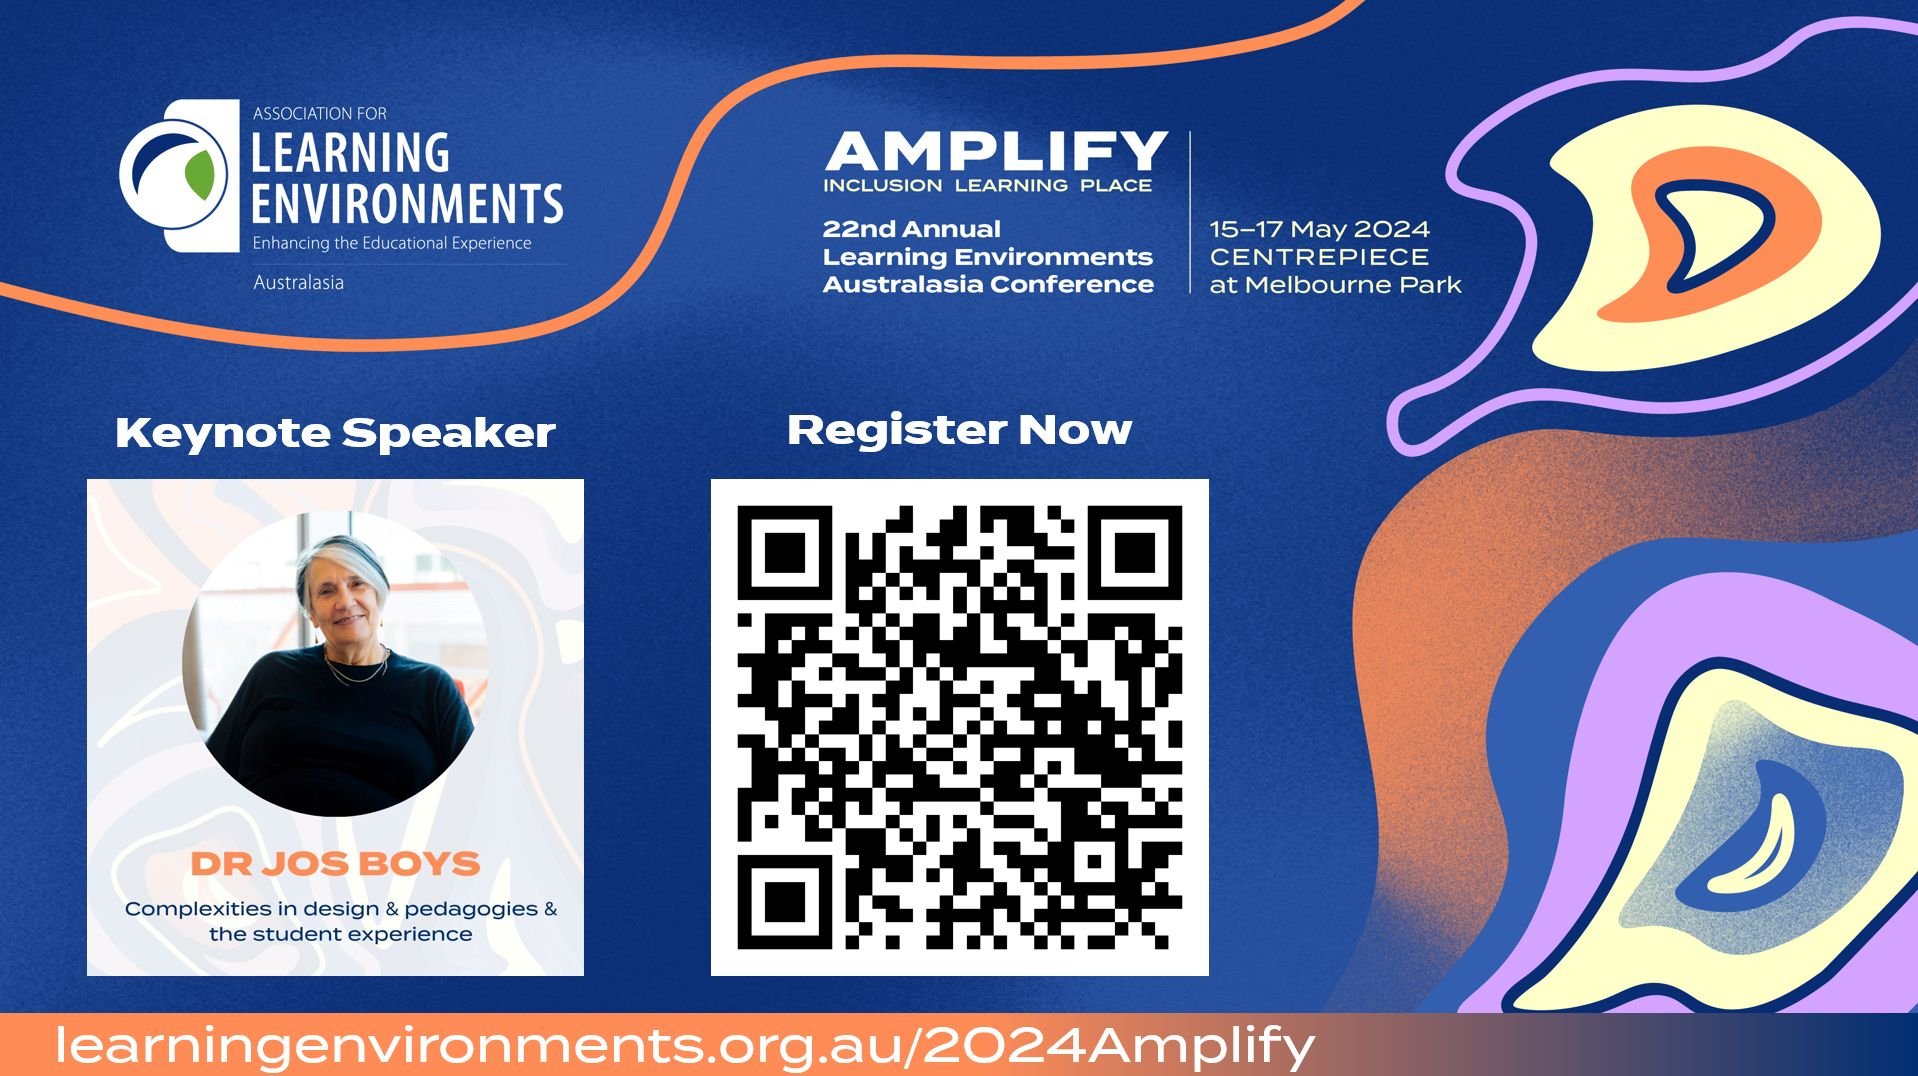 We are excited to be attending the LEA #2024AMPLIFY conference in Melbourne next month. Registrations still available at learningenvironments.org.au/2024Amplify 

🌟Architect and International Speaker Dr Jos Boys🌟

Don't miss Dr Boys discussing the 